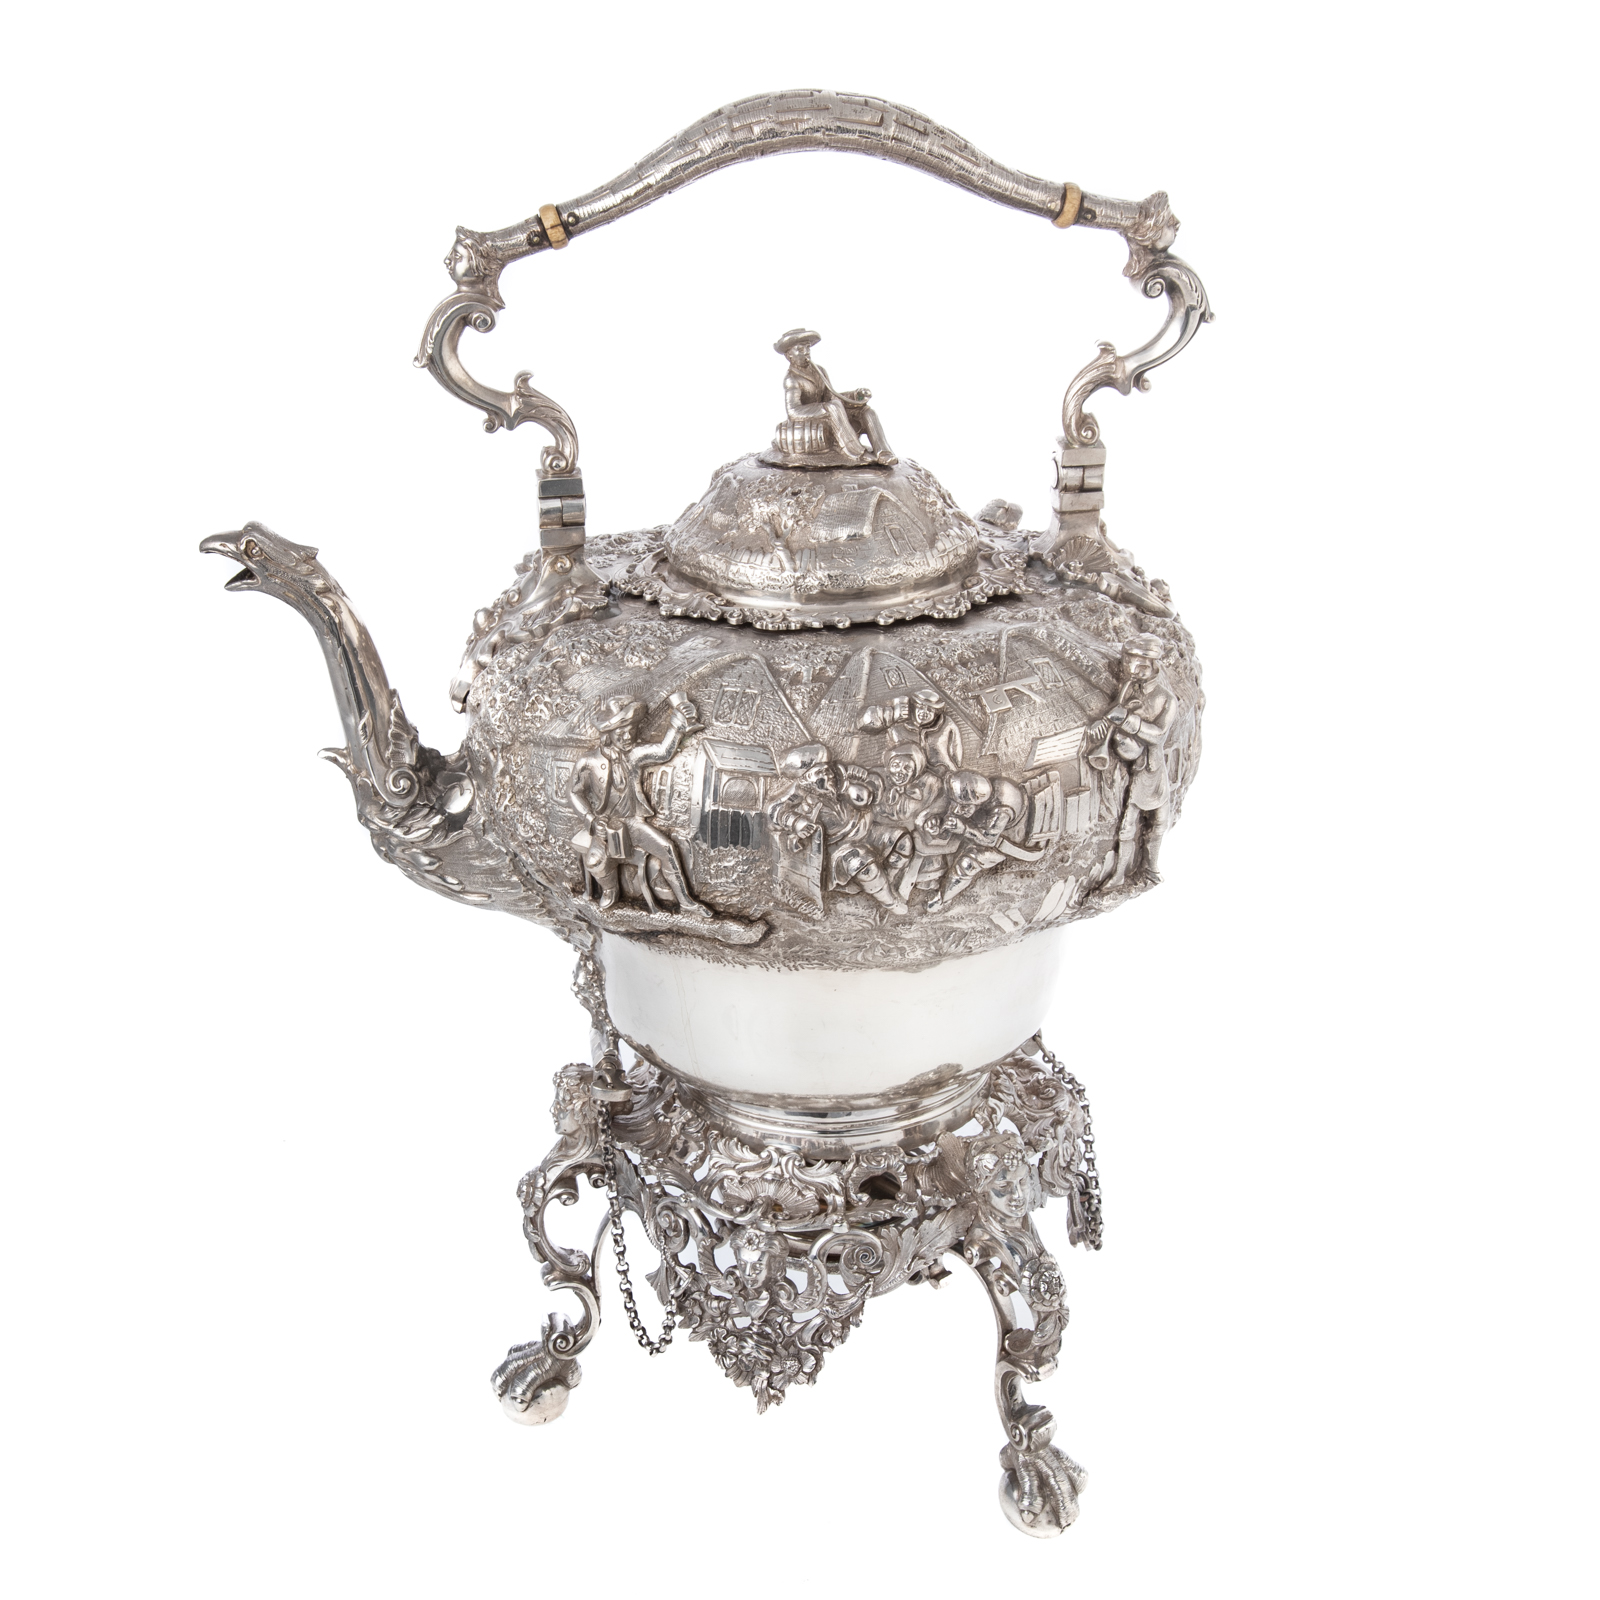 IMPRESSIVE VICTORIAN REPOUSSE KETTLE-ON-STAND